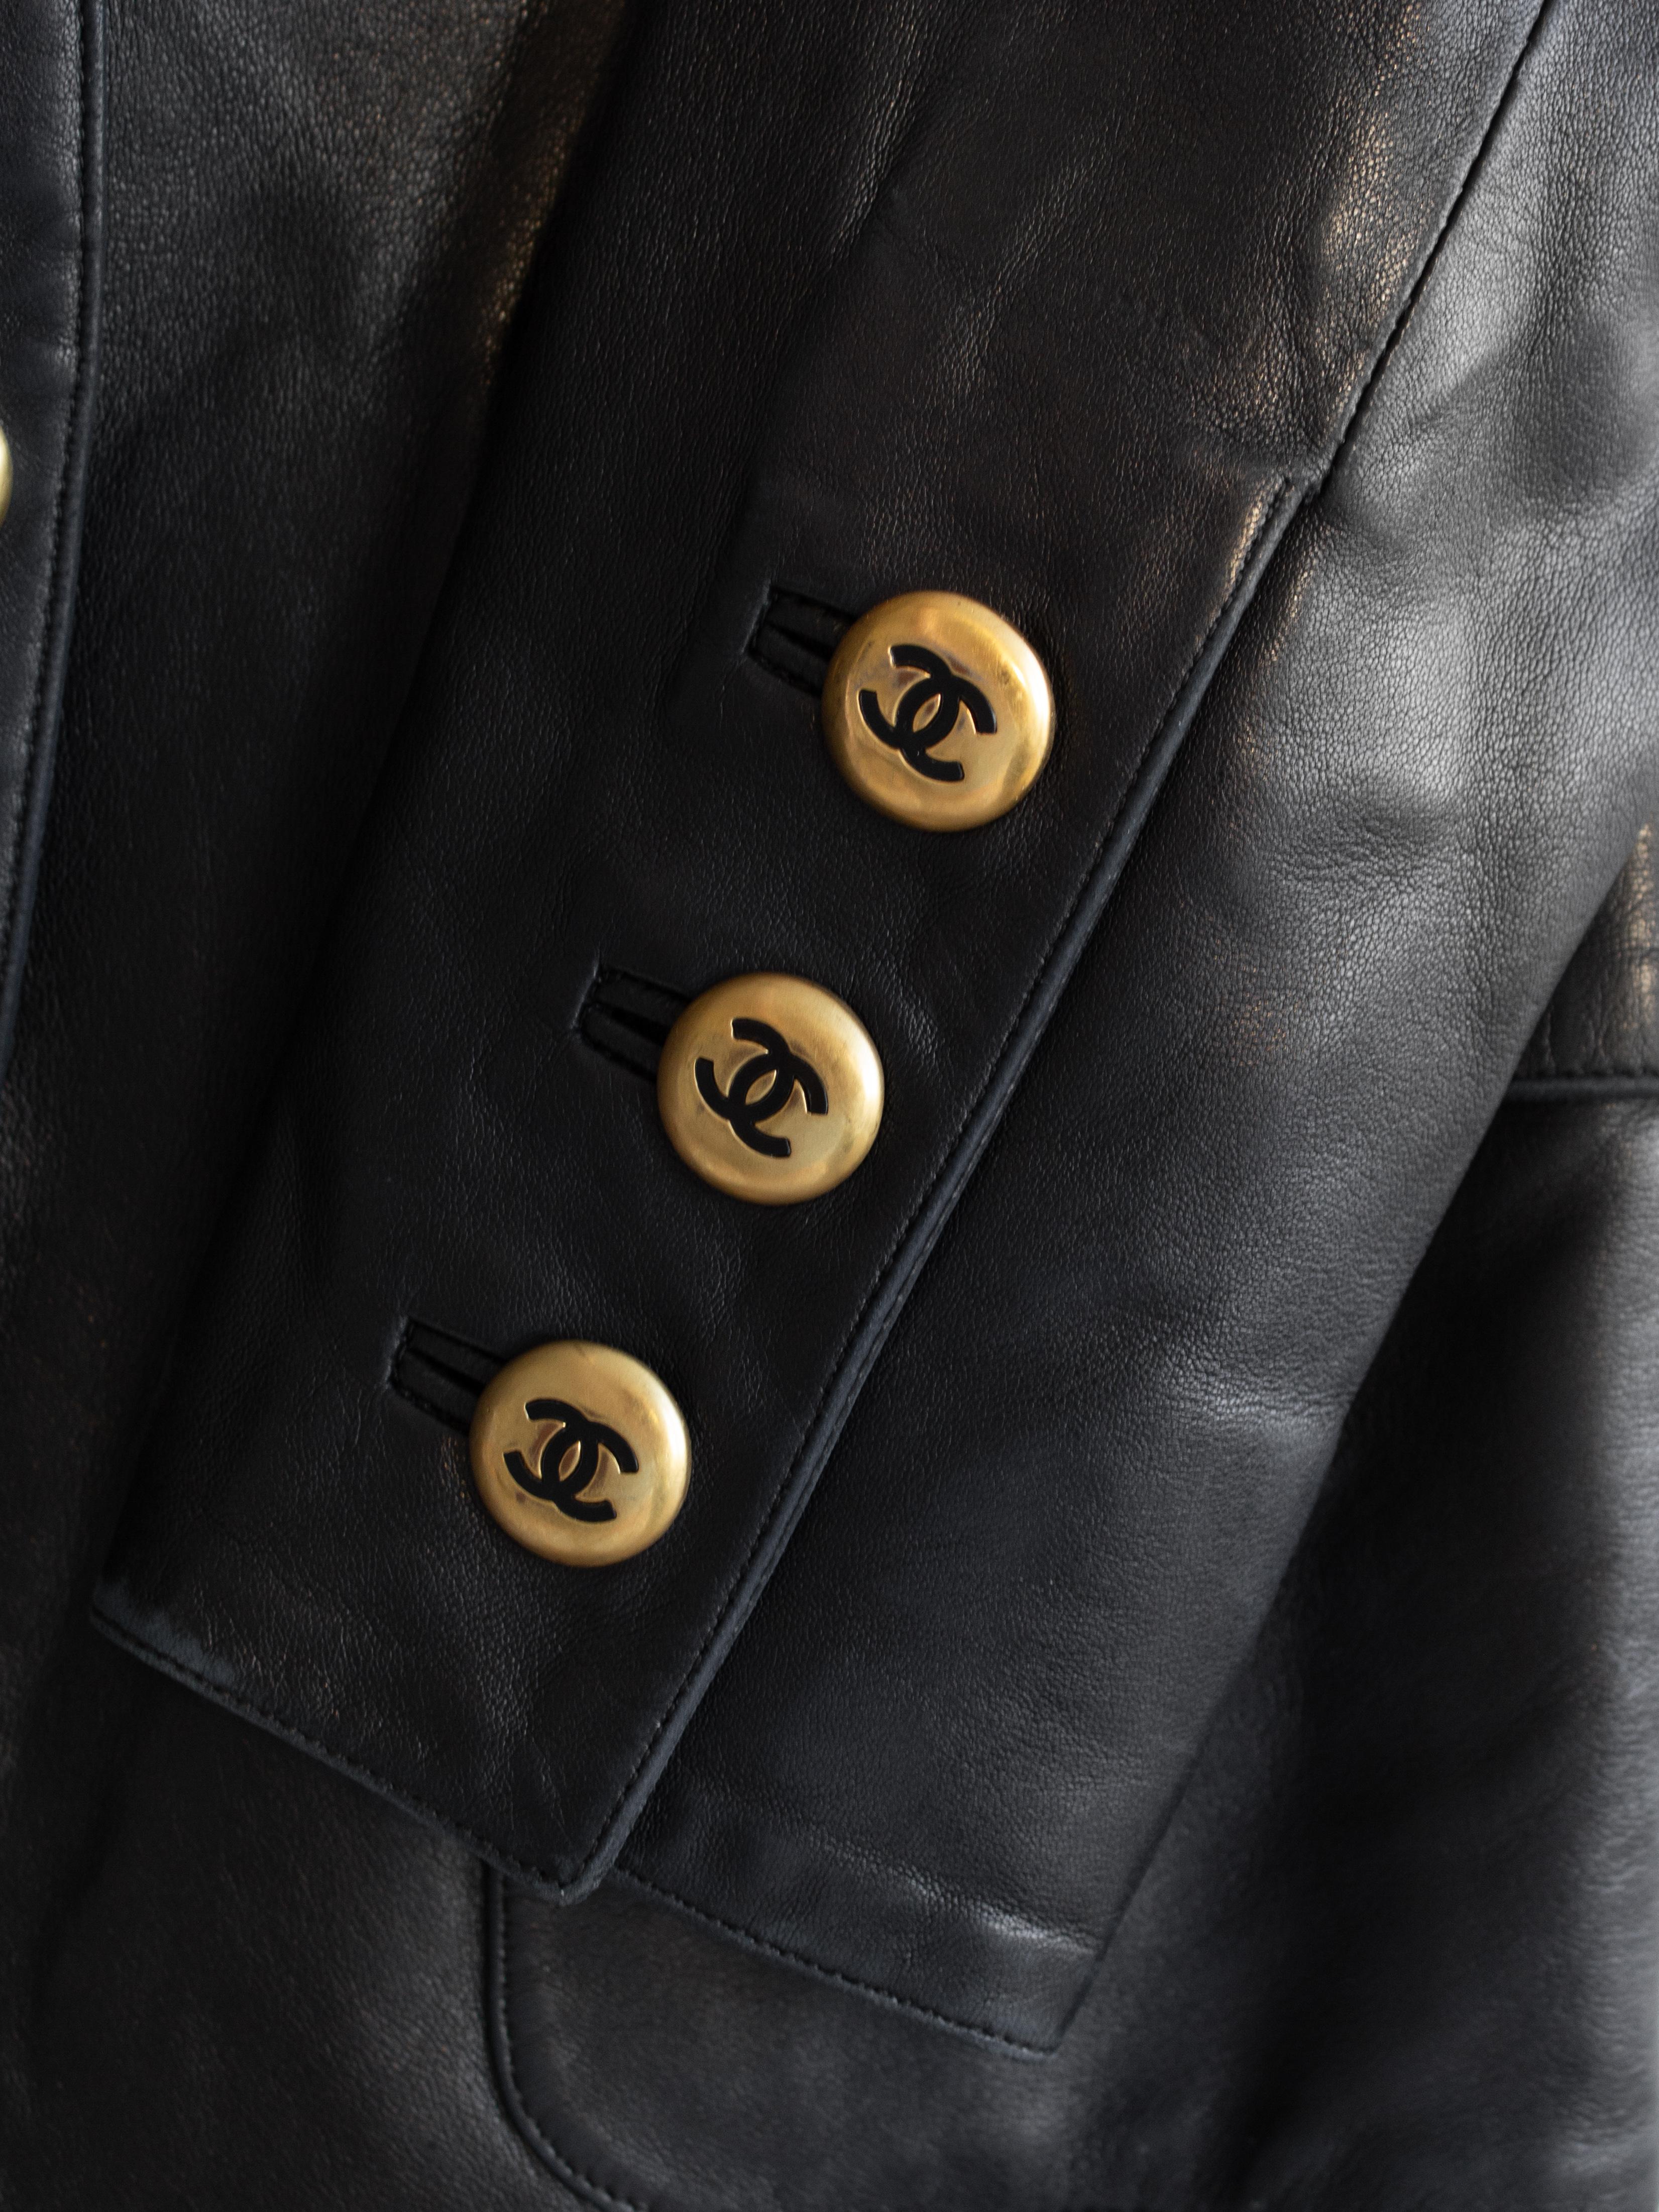 Iconic Chanel Vintage F/W 1992 Black Gold CC Lambskin Leather Suede Jacket 11